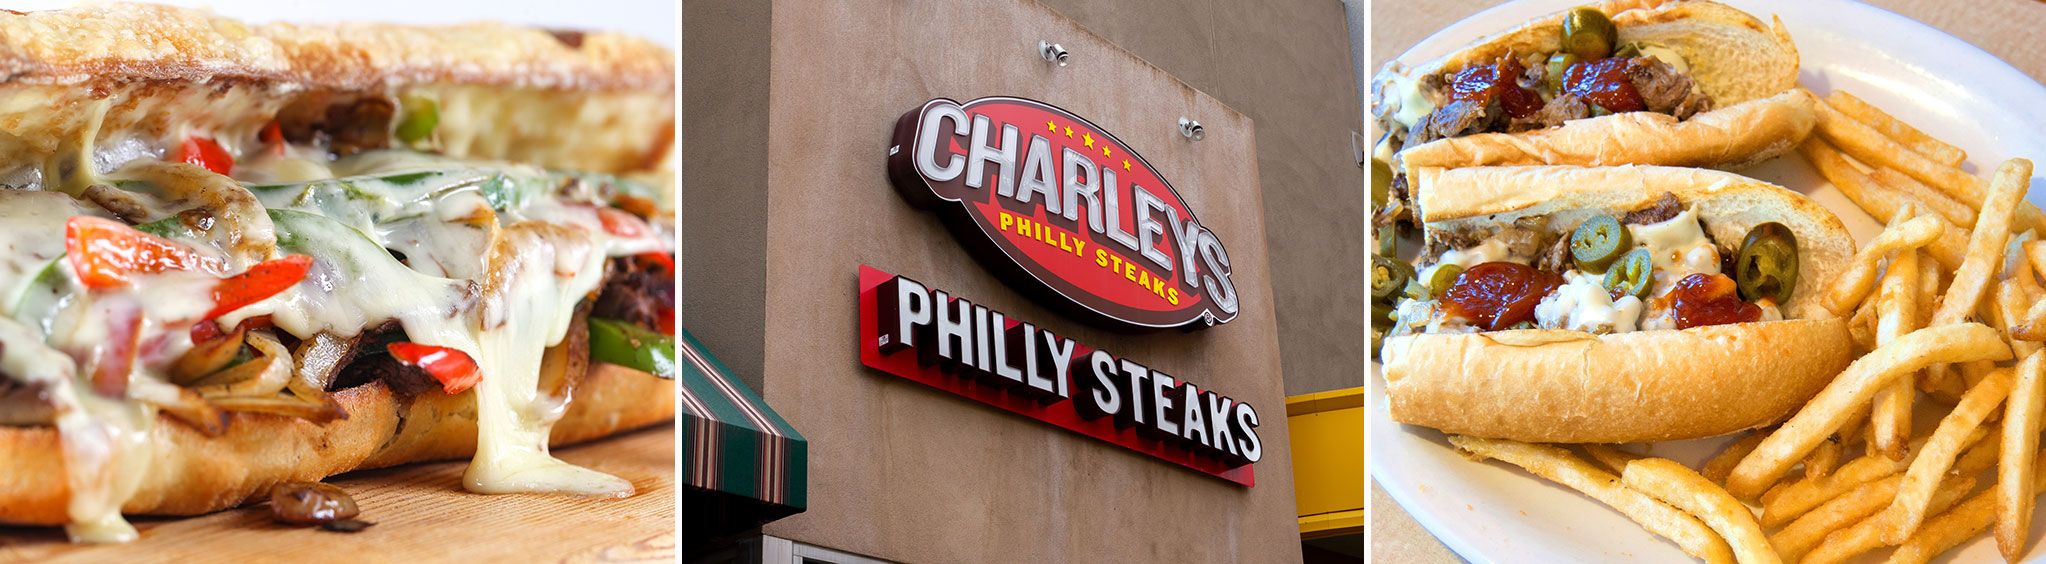 Charley's Philly Steaks at Opry Mills 